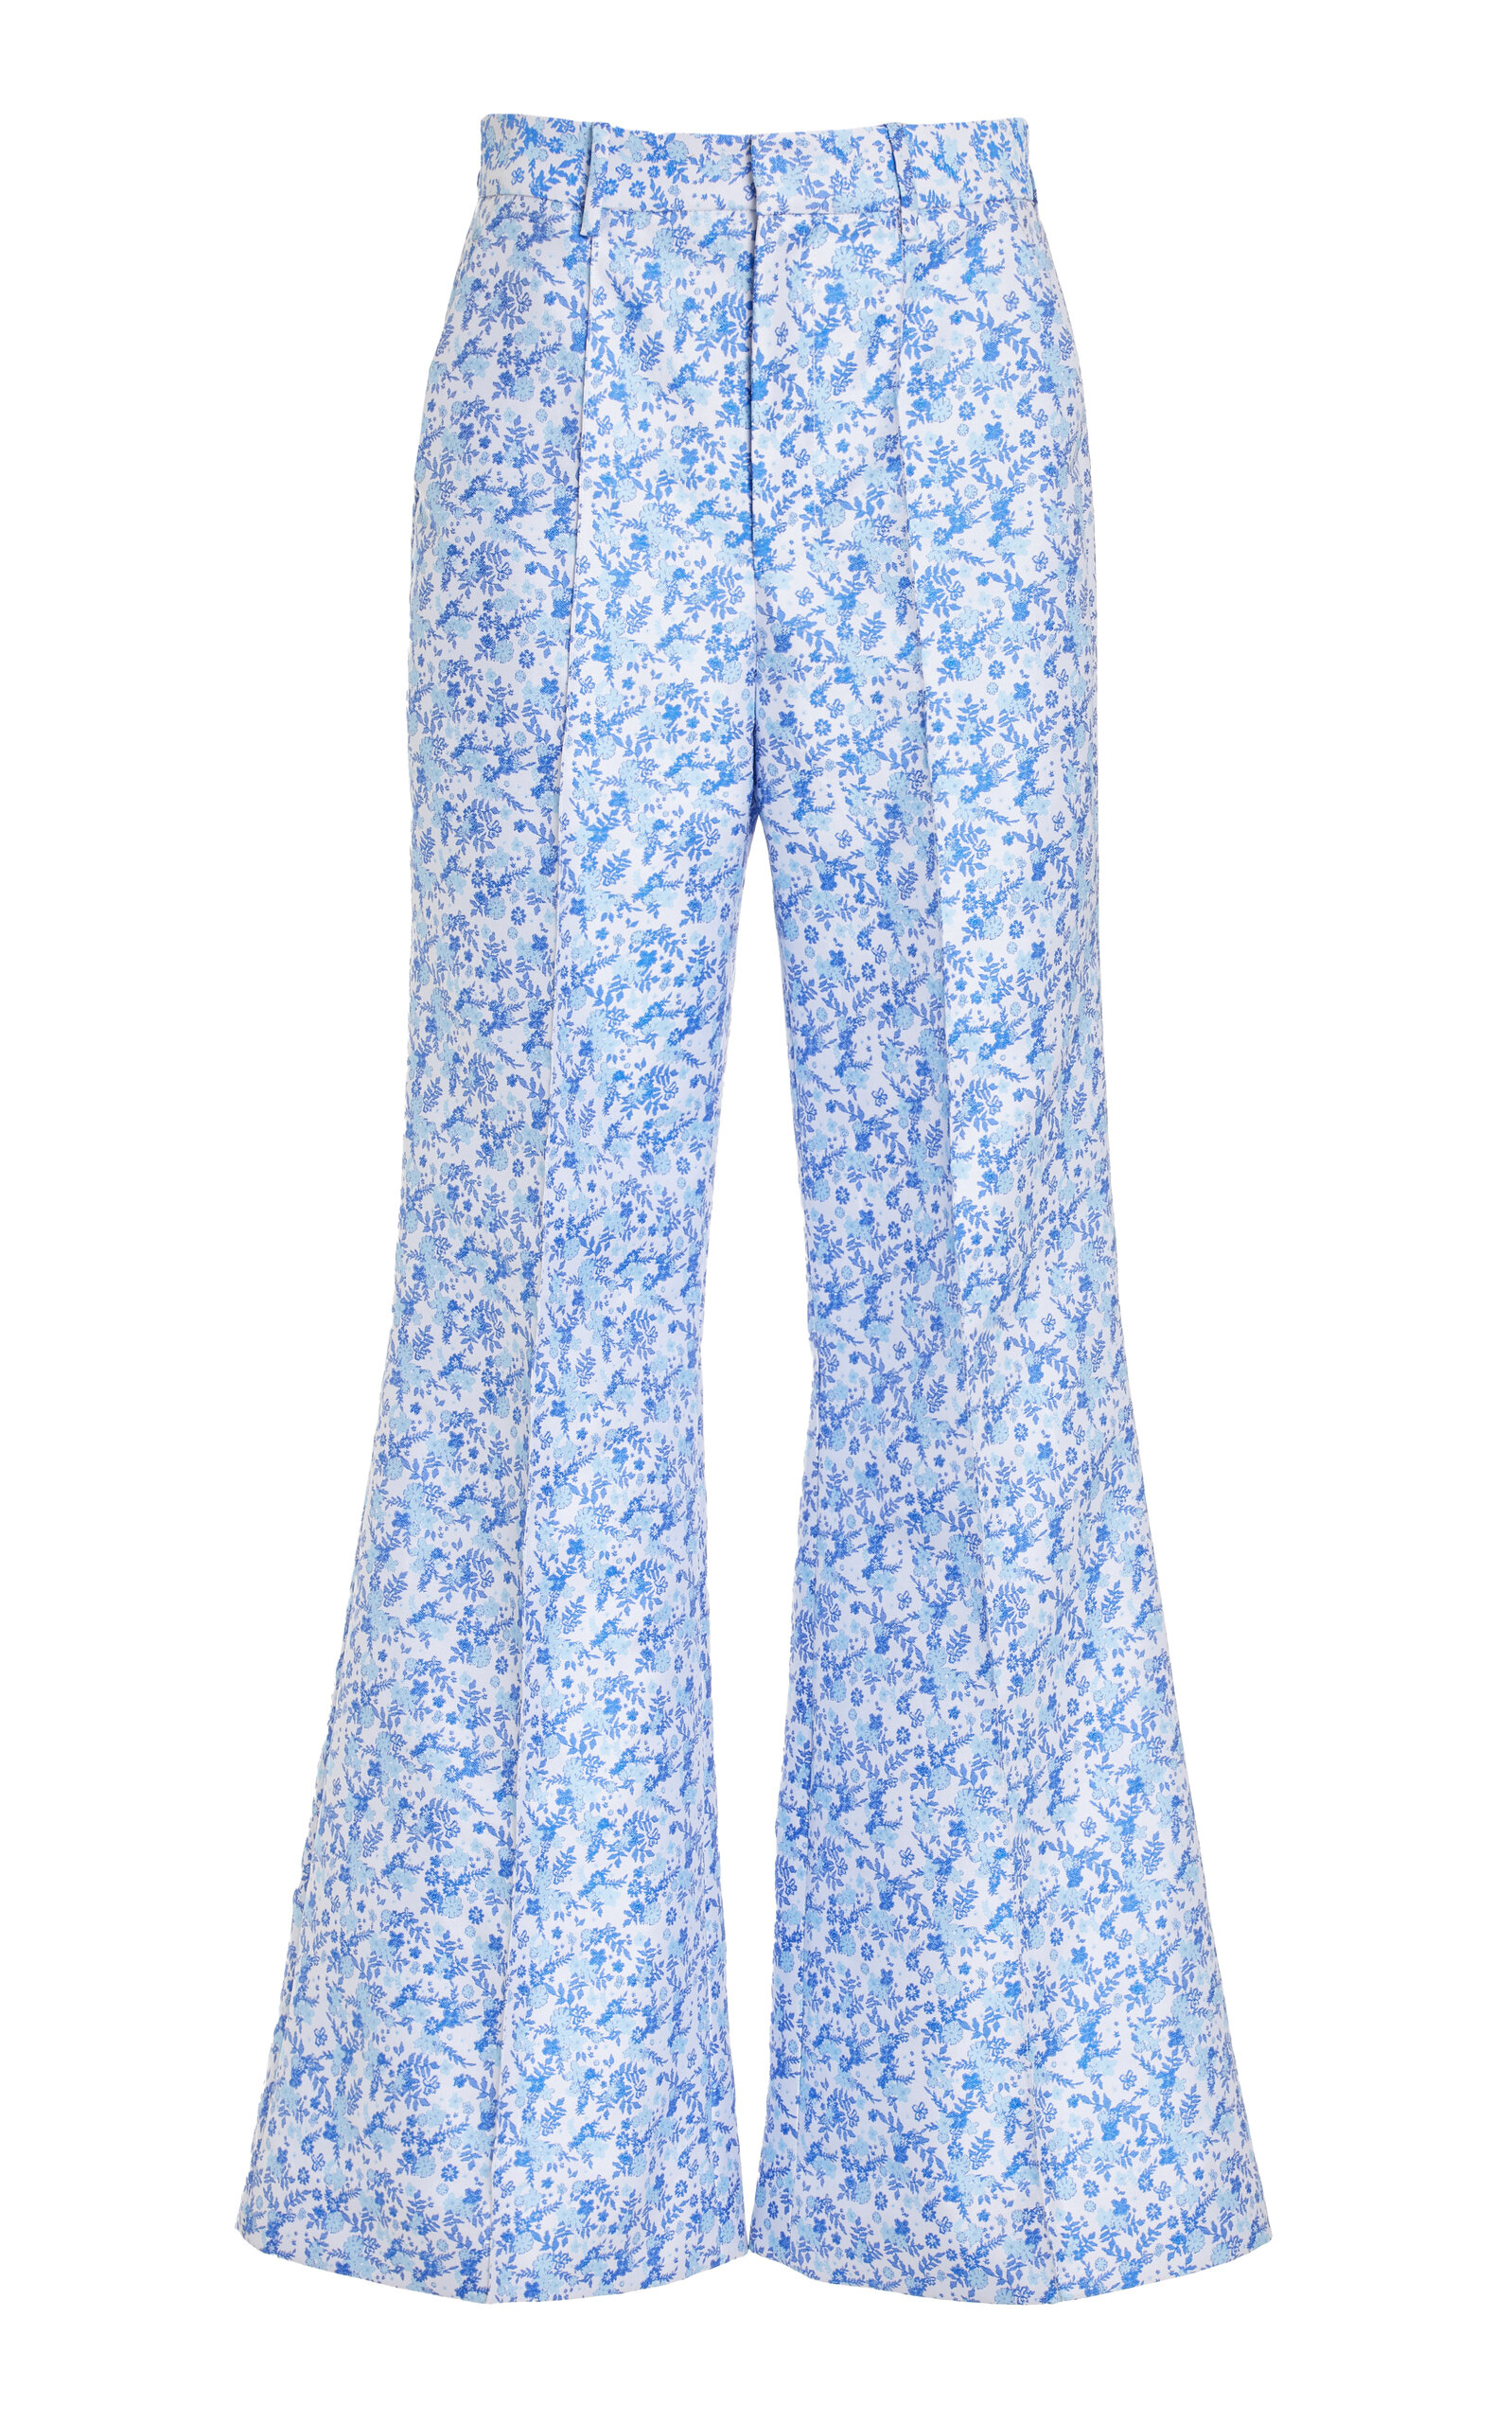 Paneled and Piped Floral Flare Pants